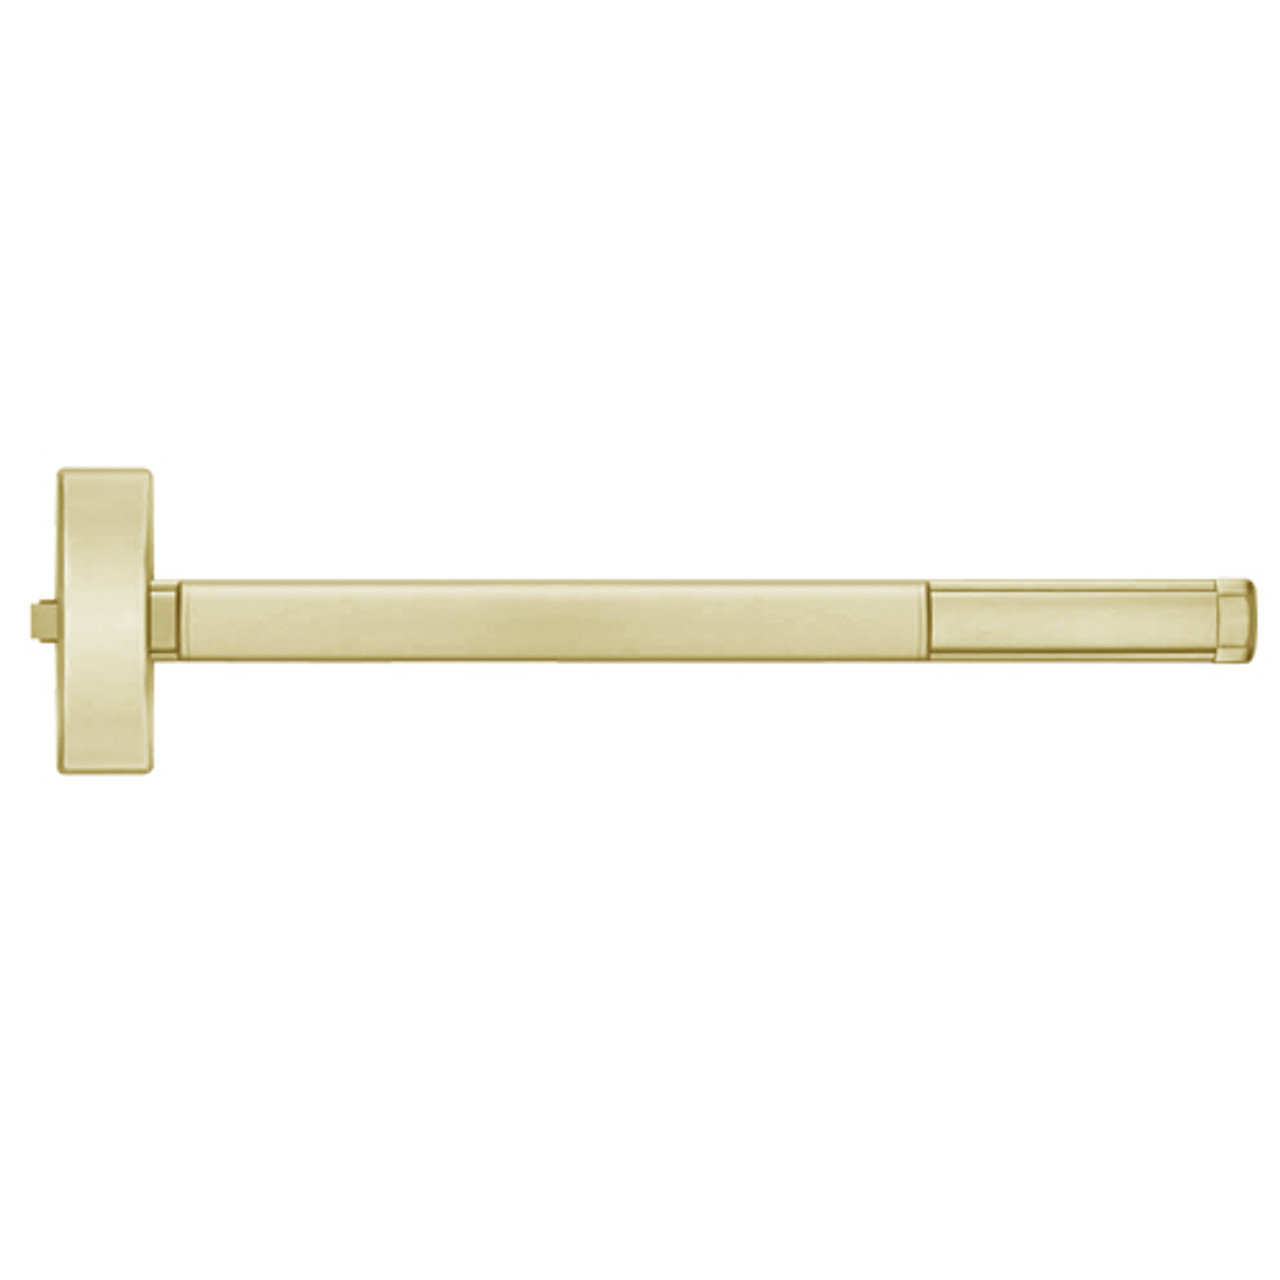 ELR2103-606-36 PHI 2100 Series Non Fire Rated Apex Rim Exit Device with Electric Latch Retraction Prepped for Key Retracts Latchbolt in Satin Brass Finish